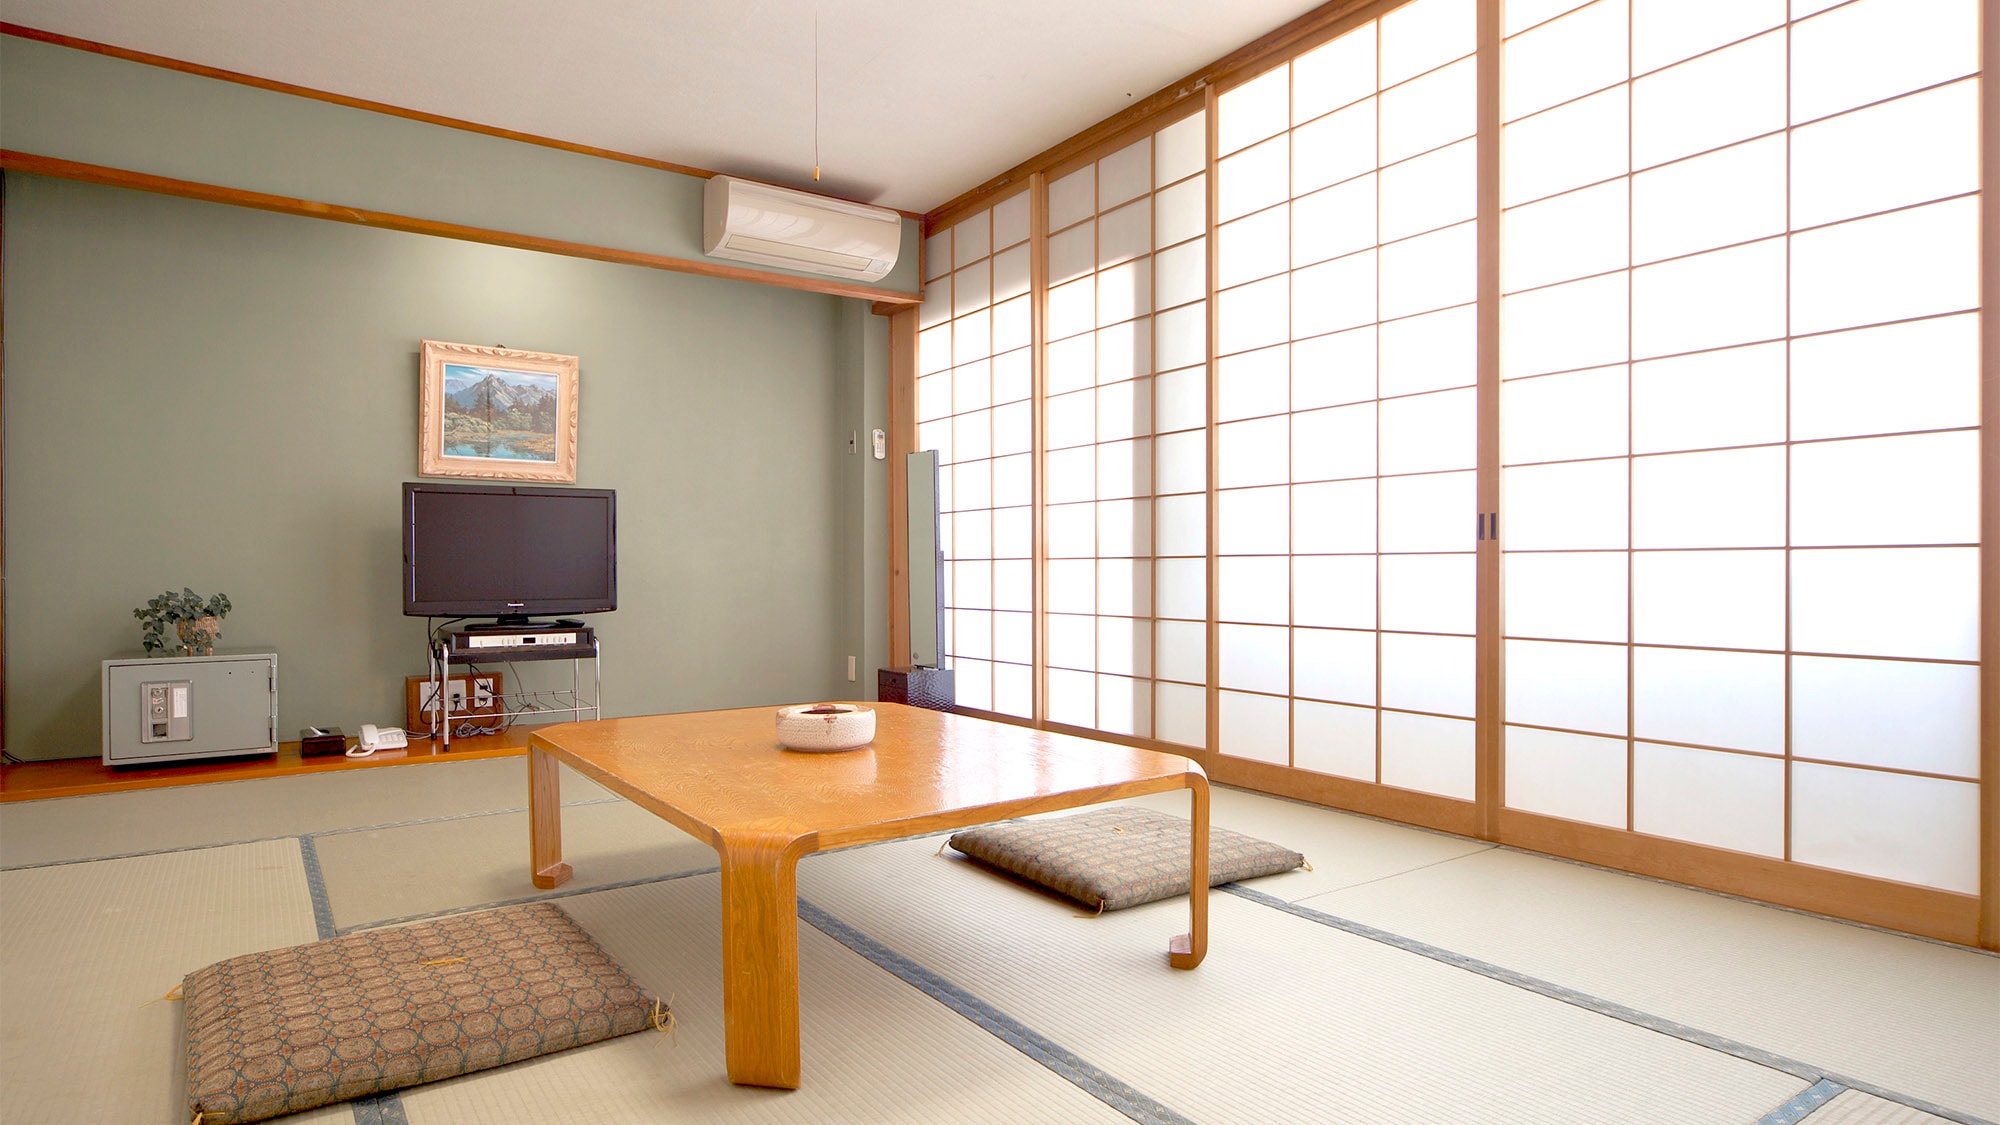 ・ [Example of guest room] Hot springs in each guest room! You can enjoy Gero Onsen in your room